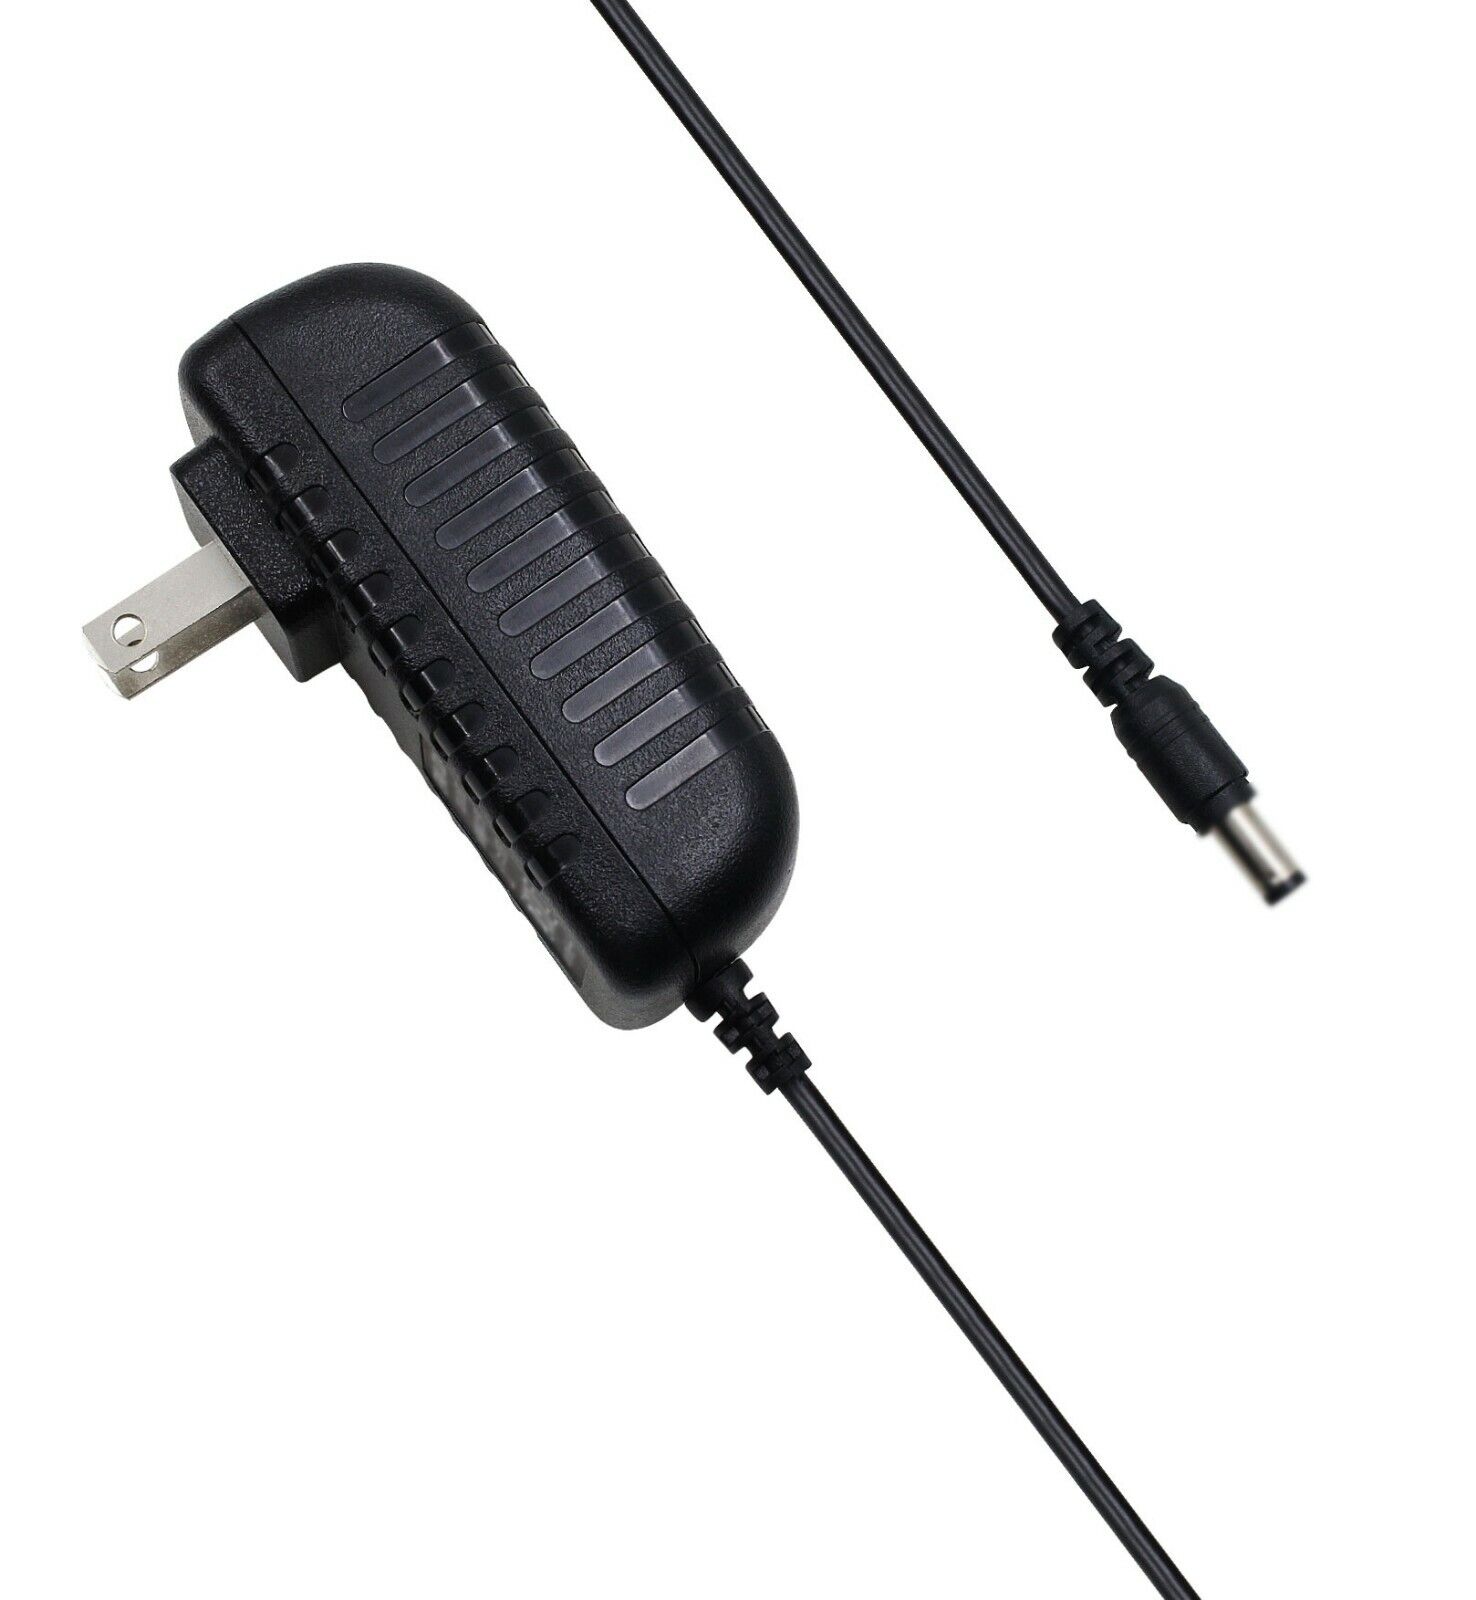 AC/DC Power Supply Adapter Cord For Naturalico Shiatsu Neck and Back Massager